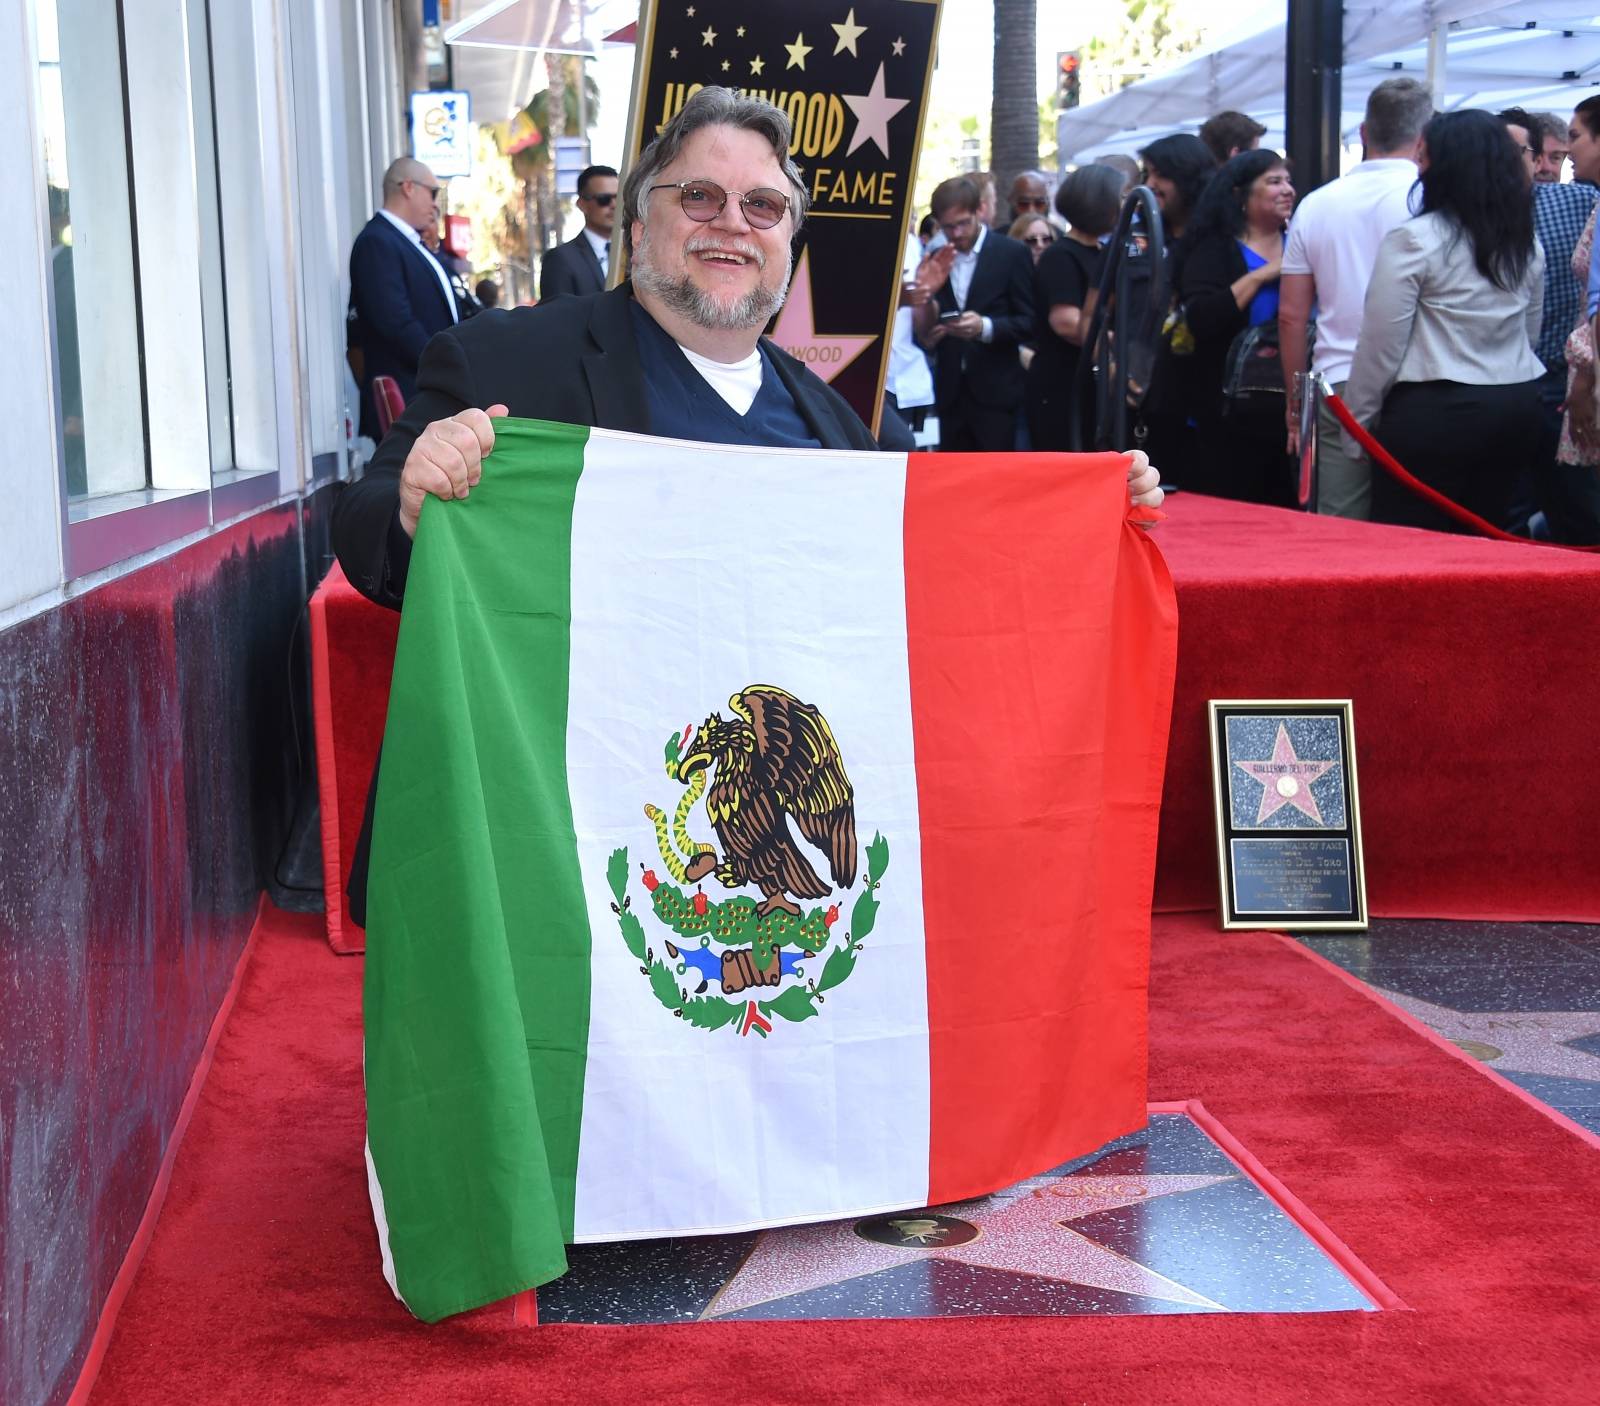 Guillermo del Toro receives Hollywood walk of fame star - Los Angeles